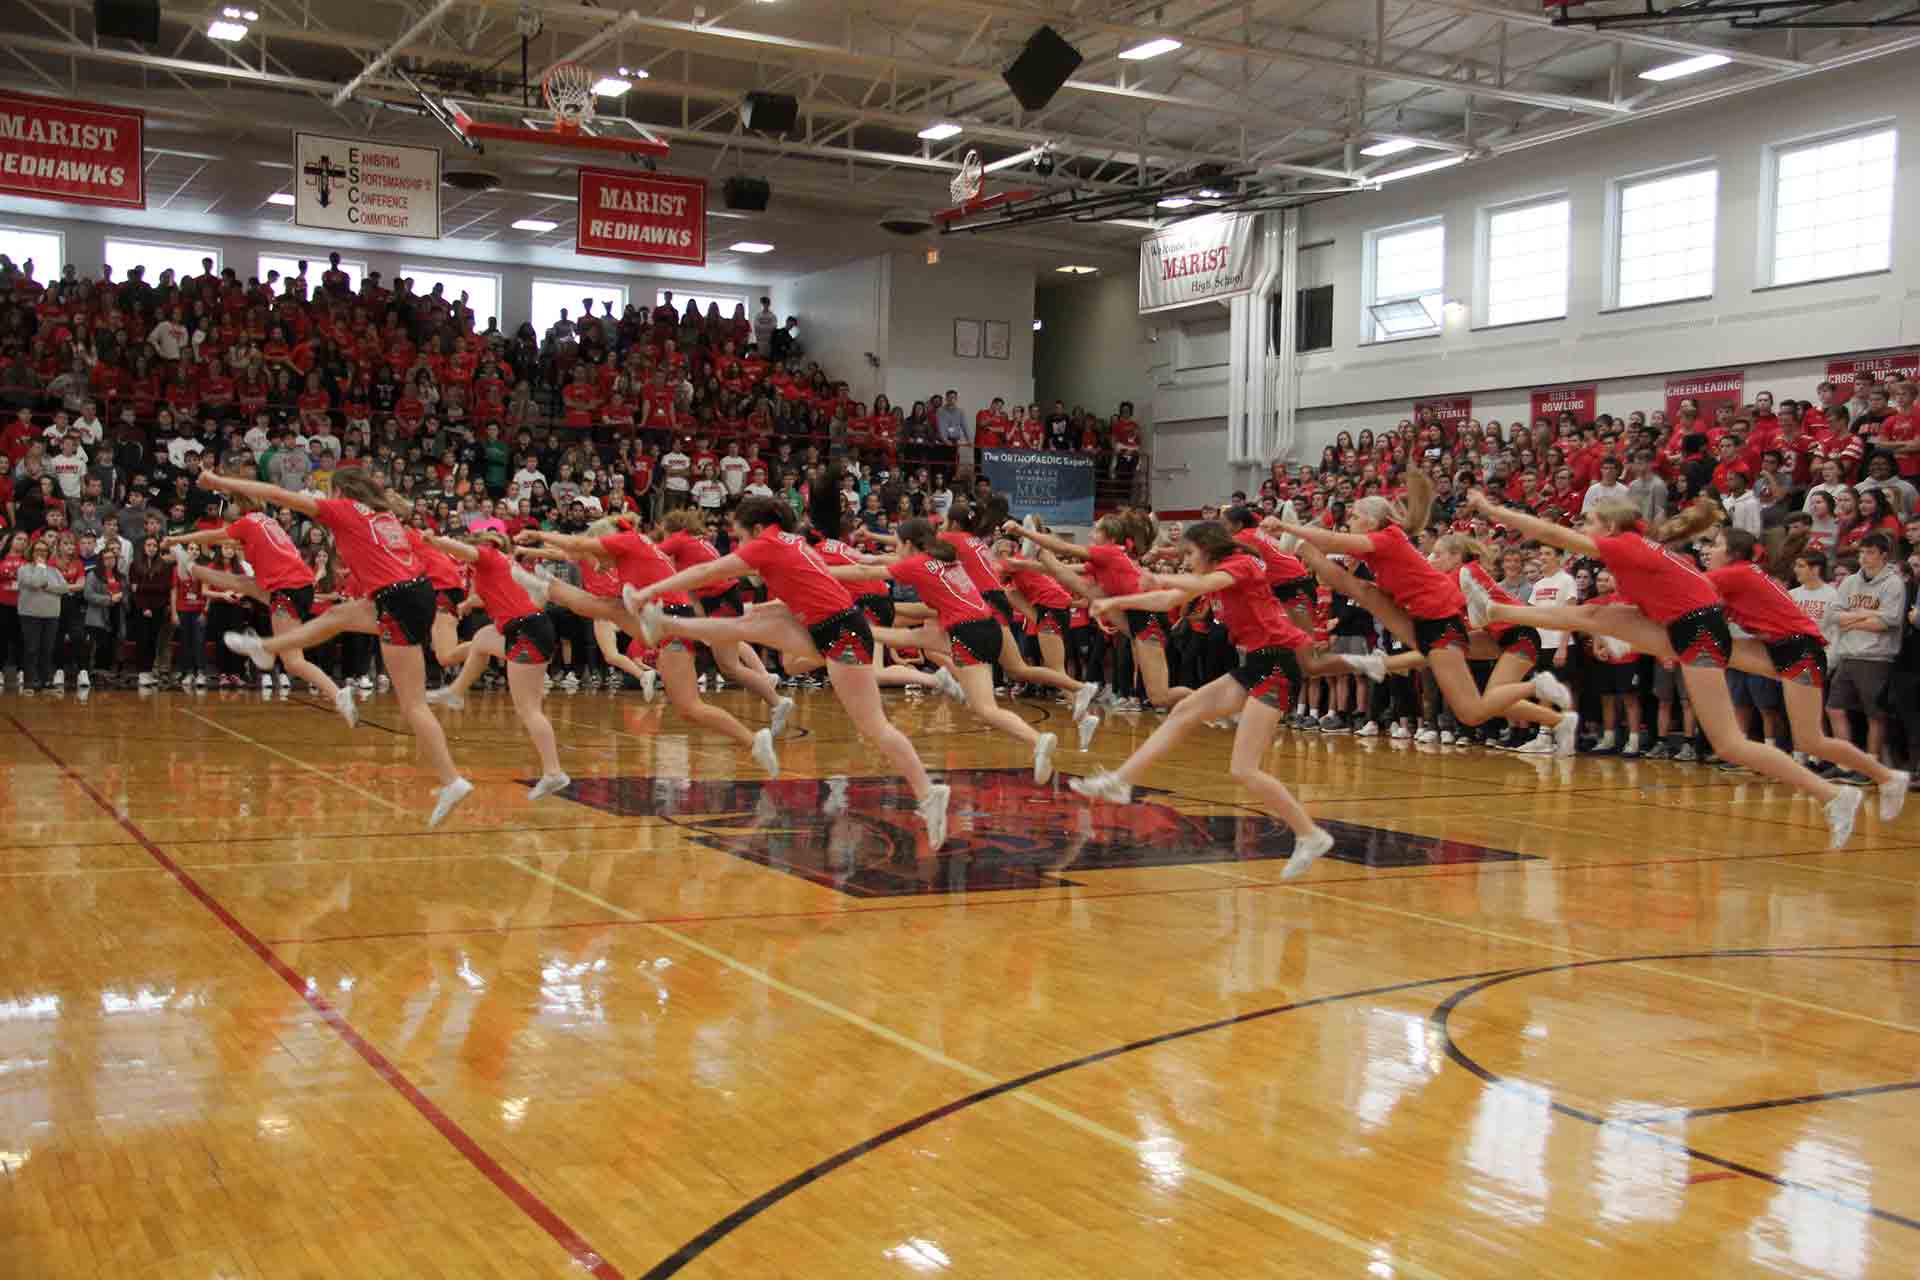 homecoming-rally-2019-students-performing-and-jumping-together